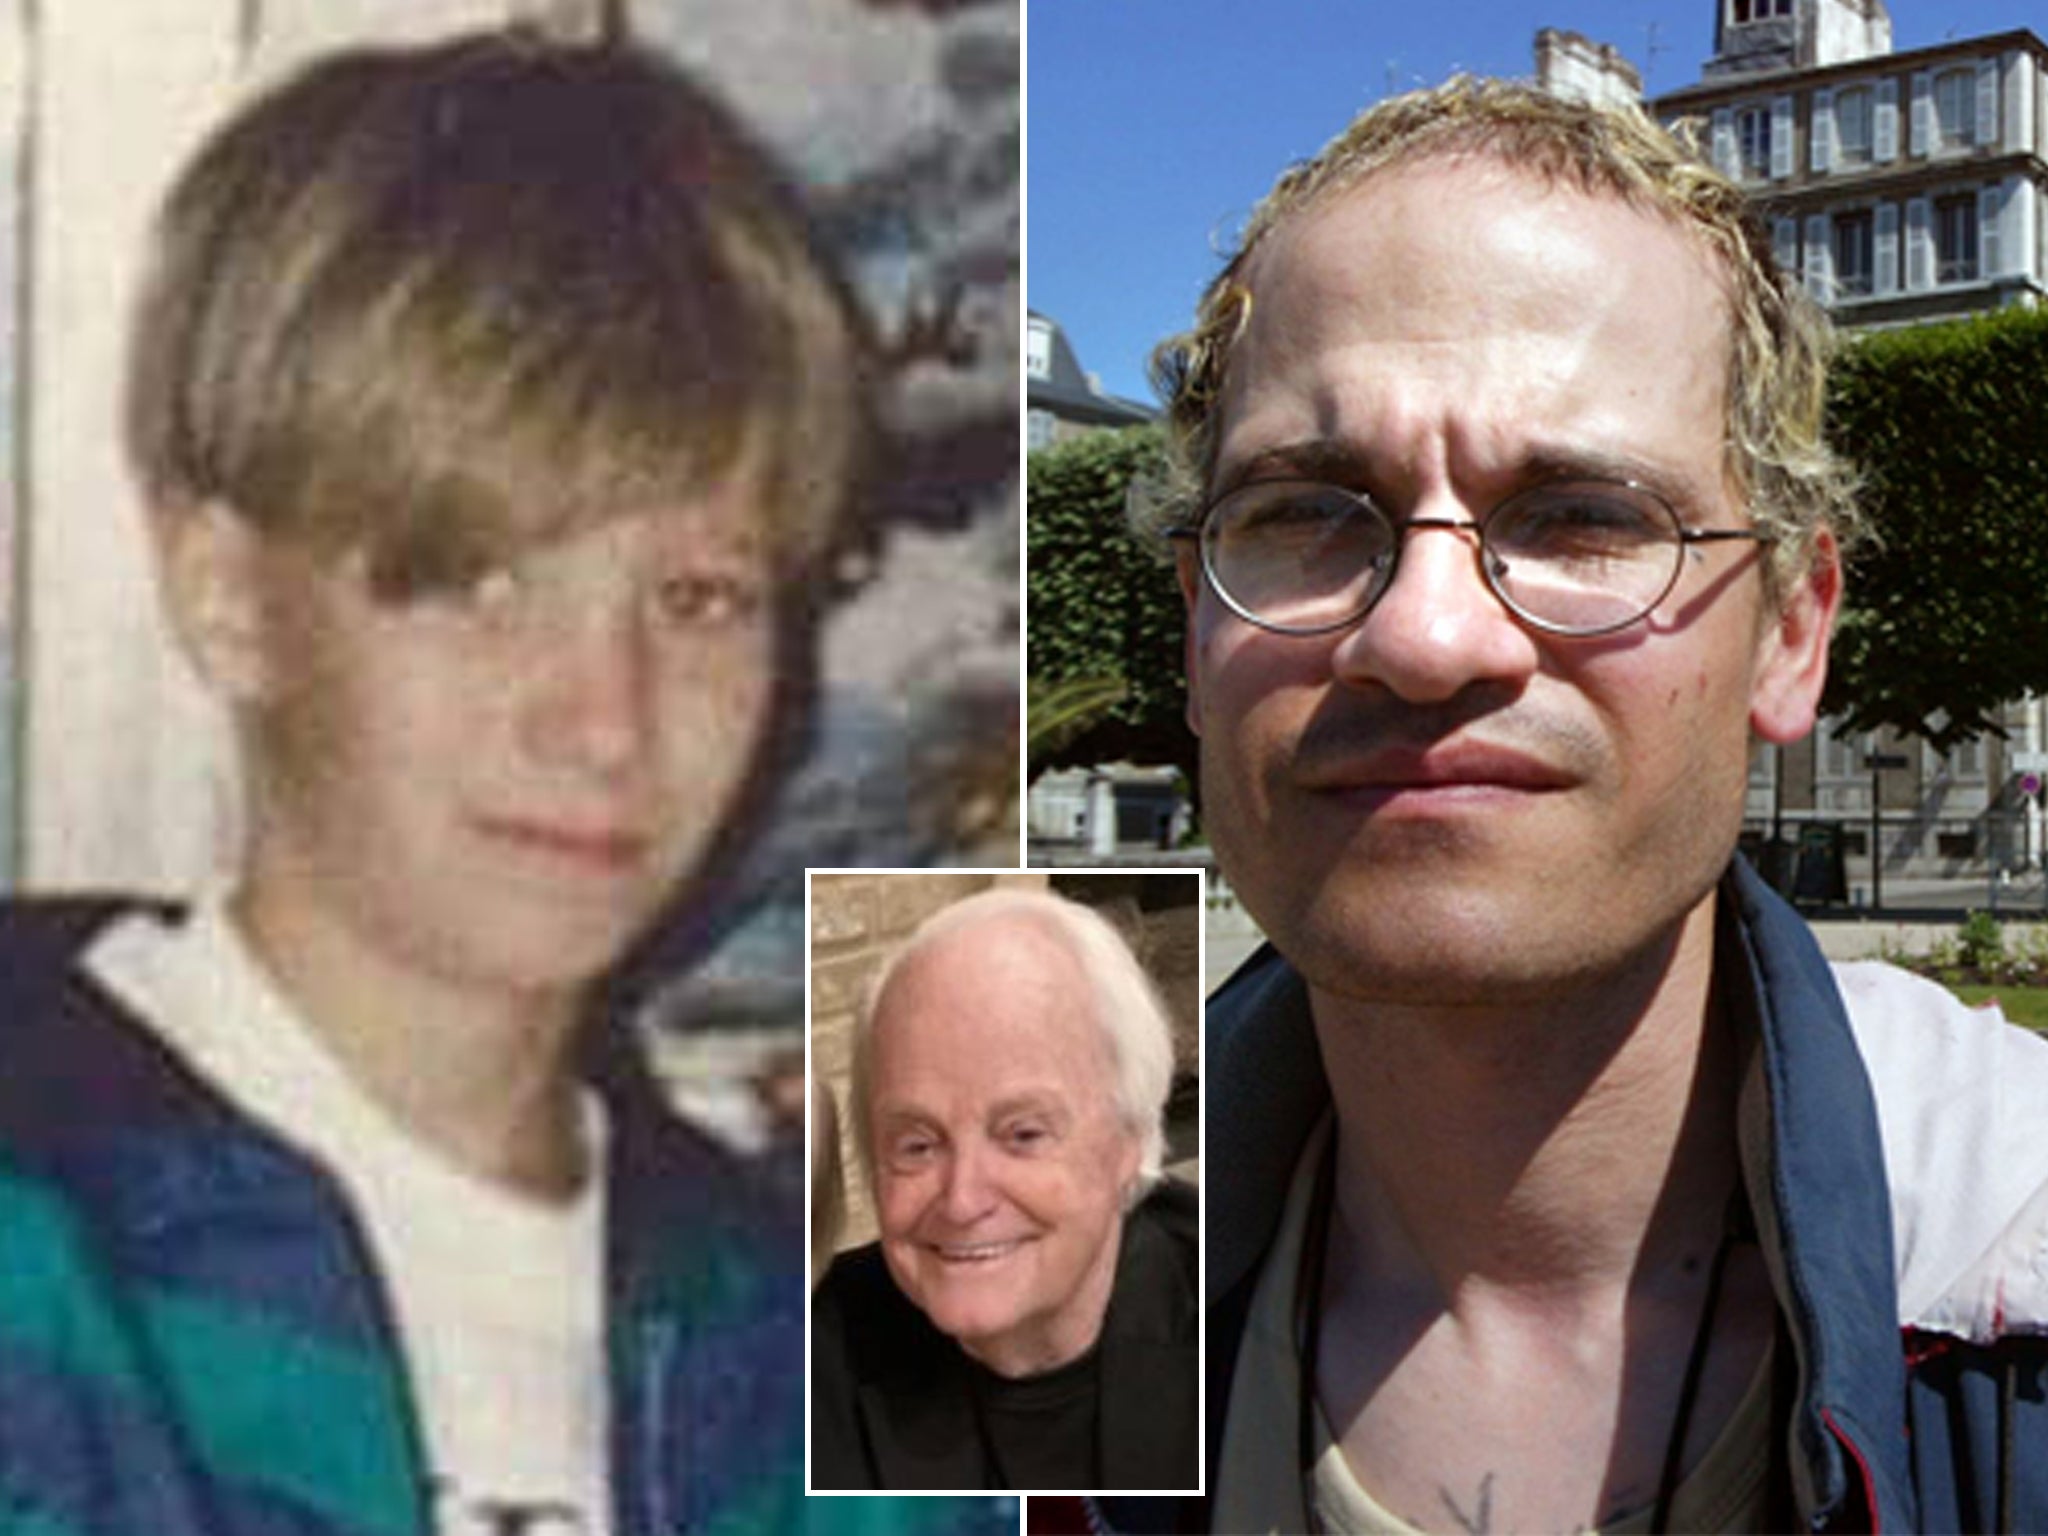 A French imposter convinced everyone he was missing Texas teen Nicholas Barclay picture